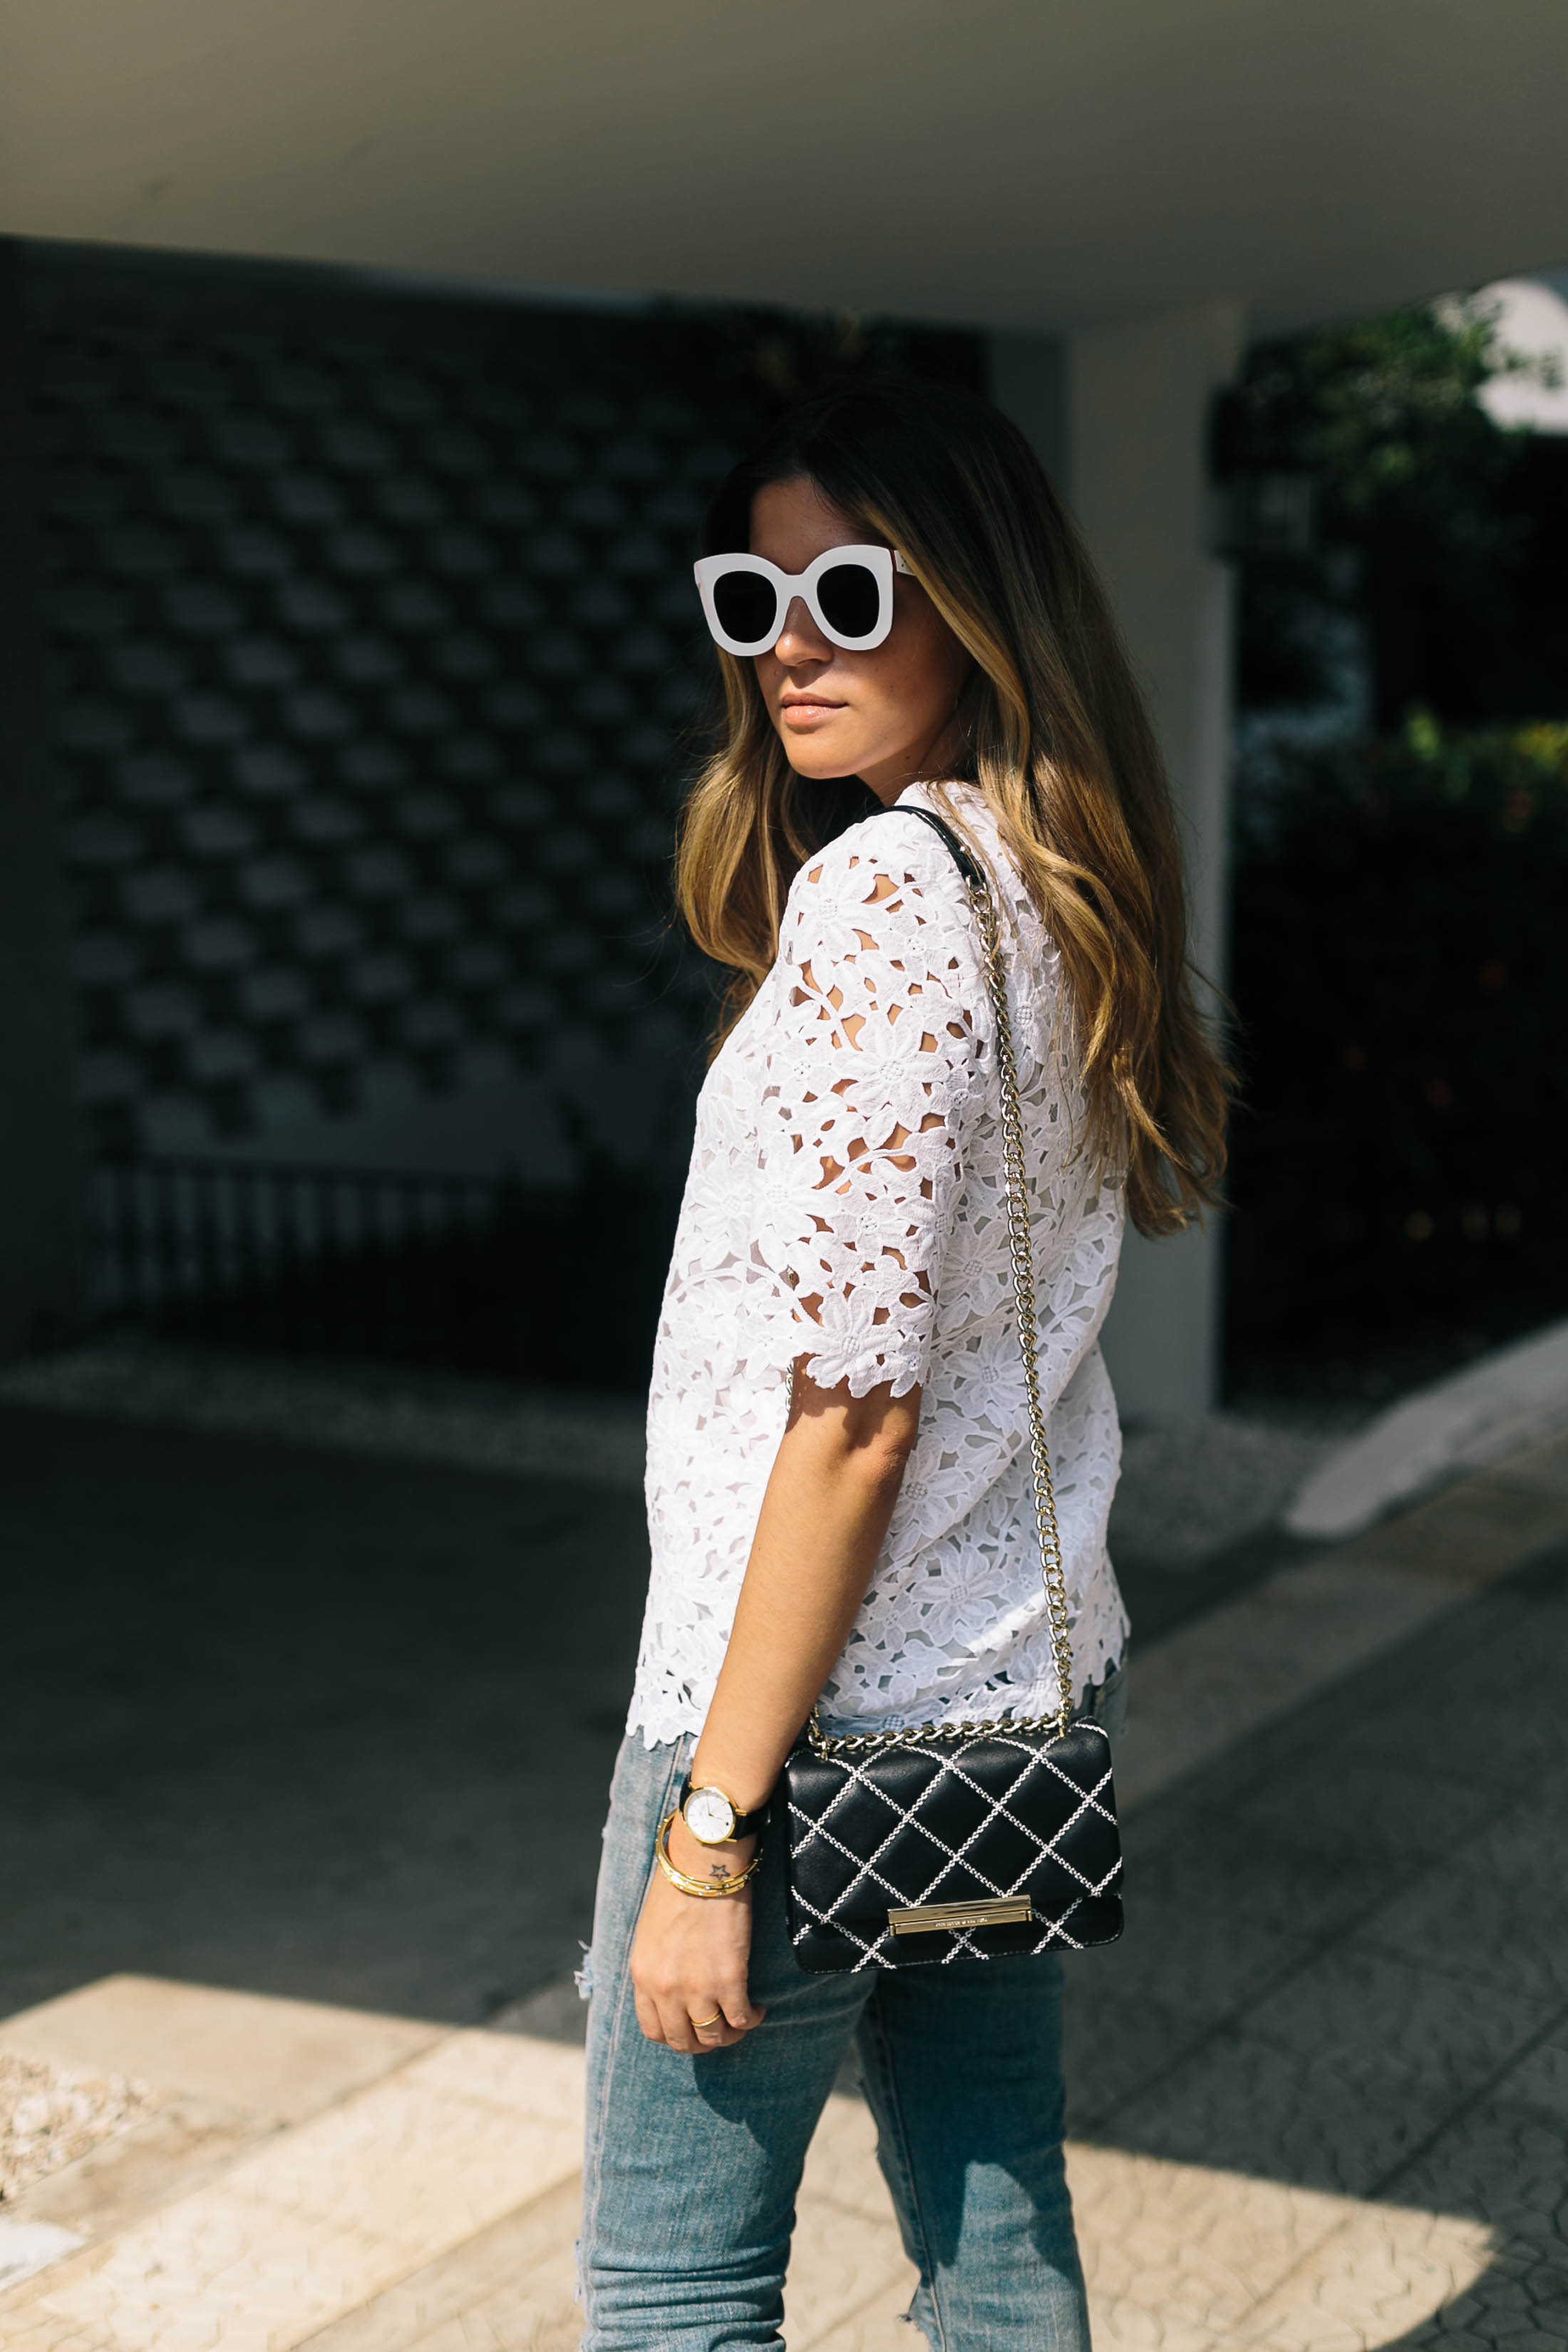 Panama blogger Maristella wears white oversize Céline sunglasses, white lace top and bag from Kate Spade, jeans from Saint Laurent